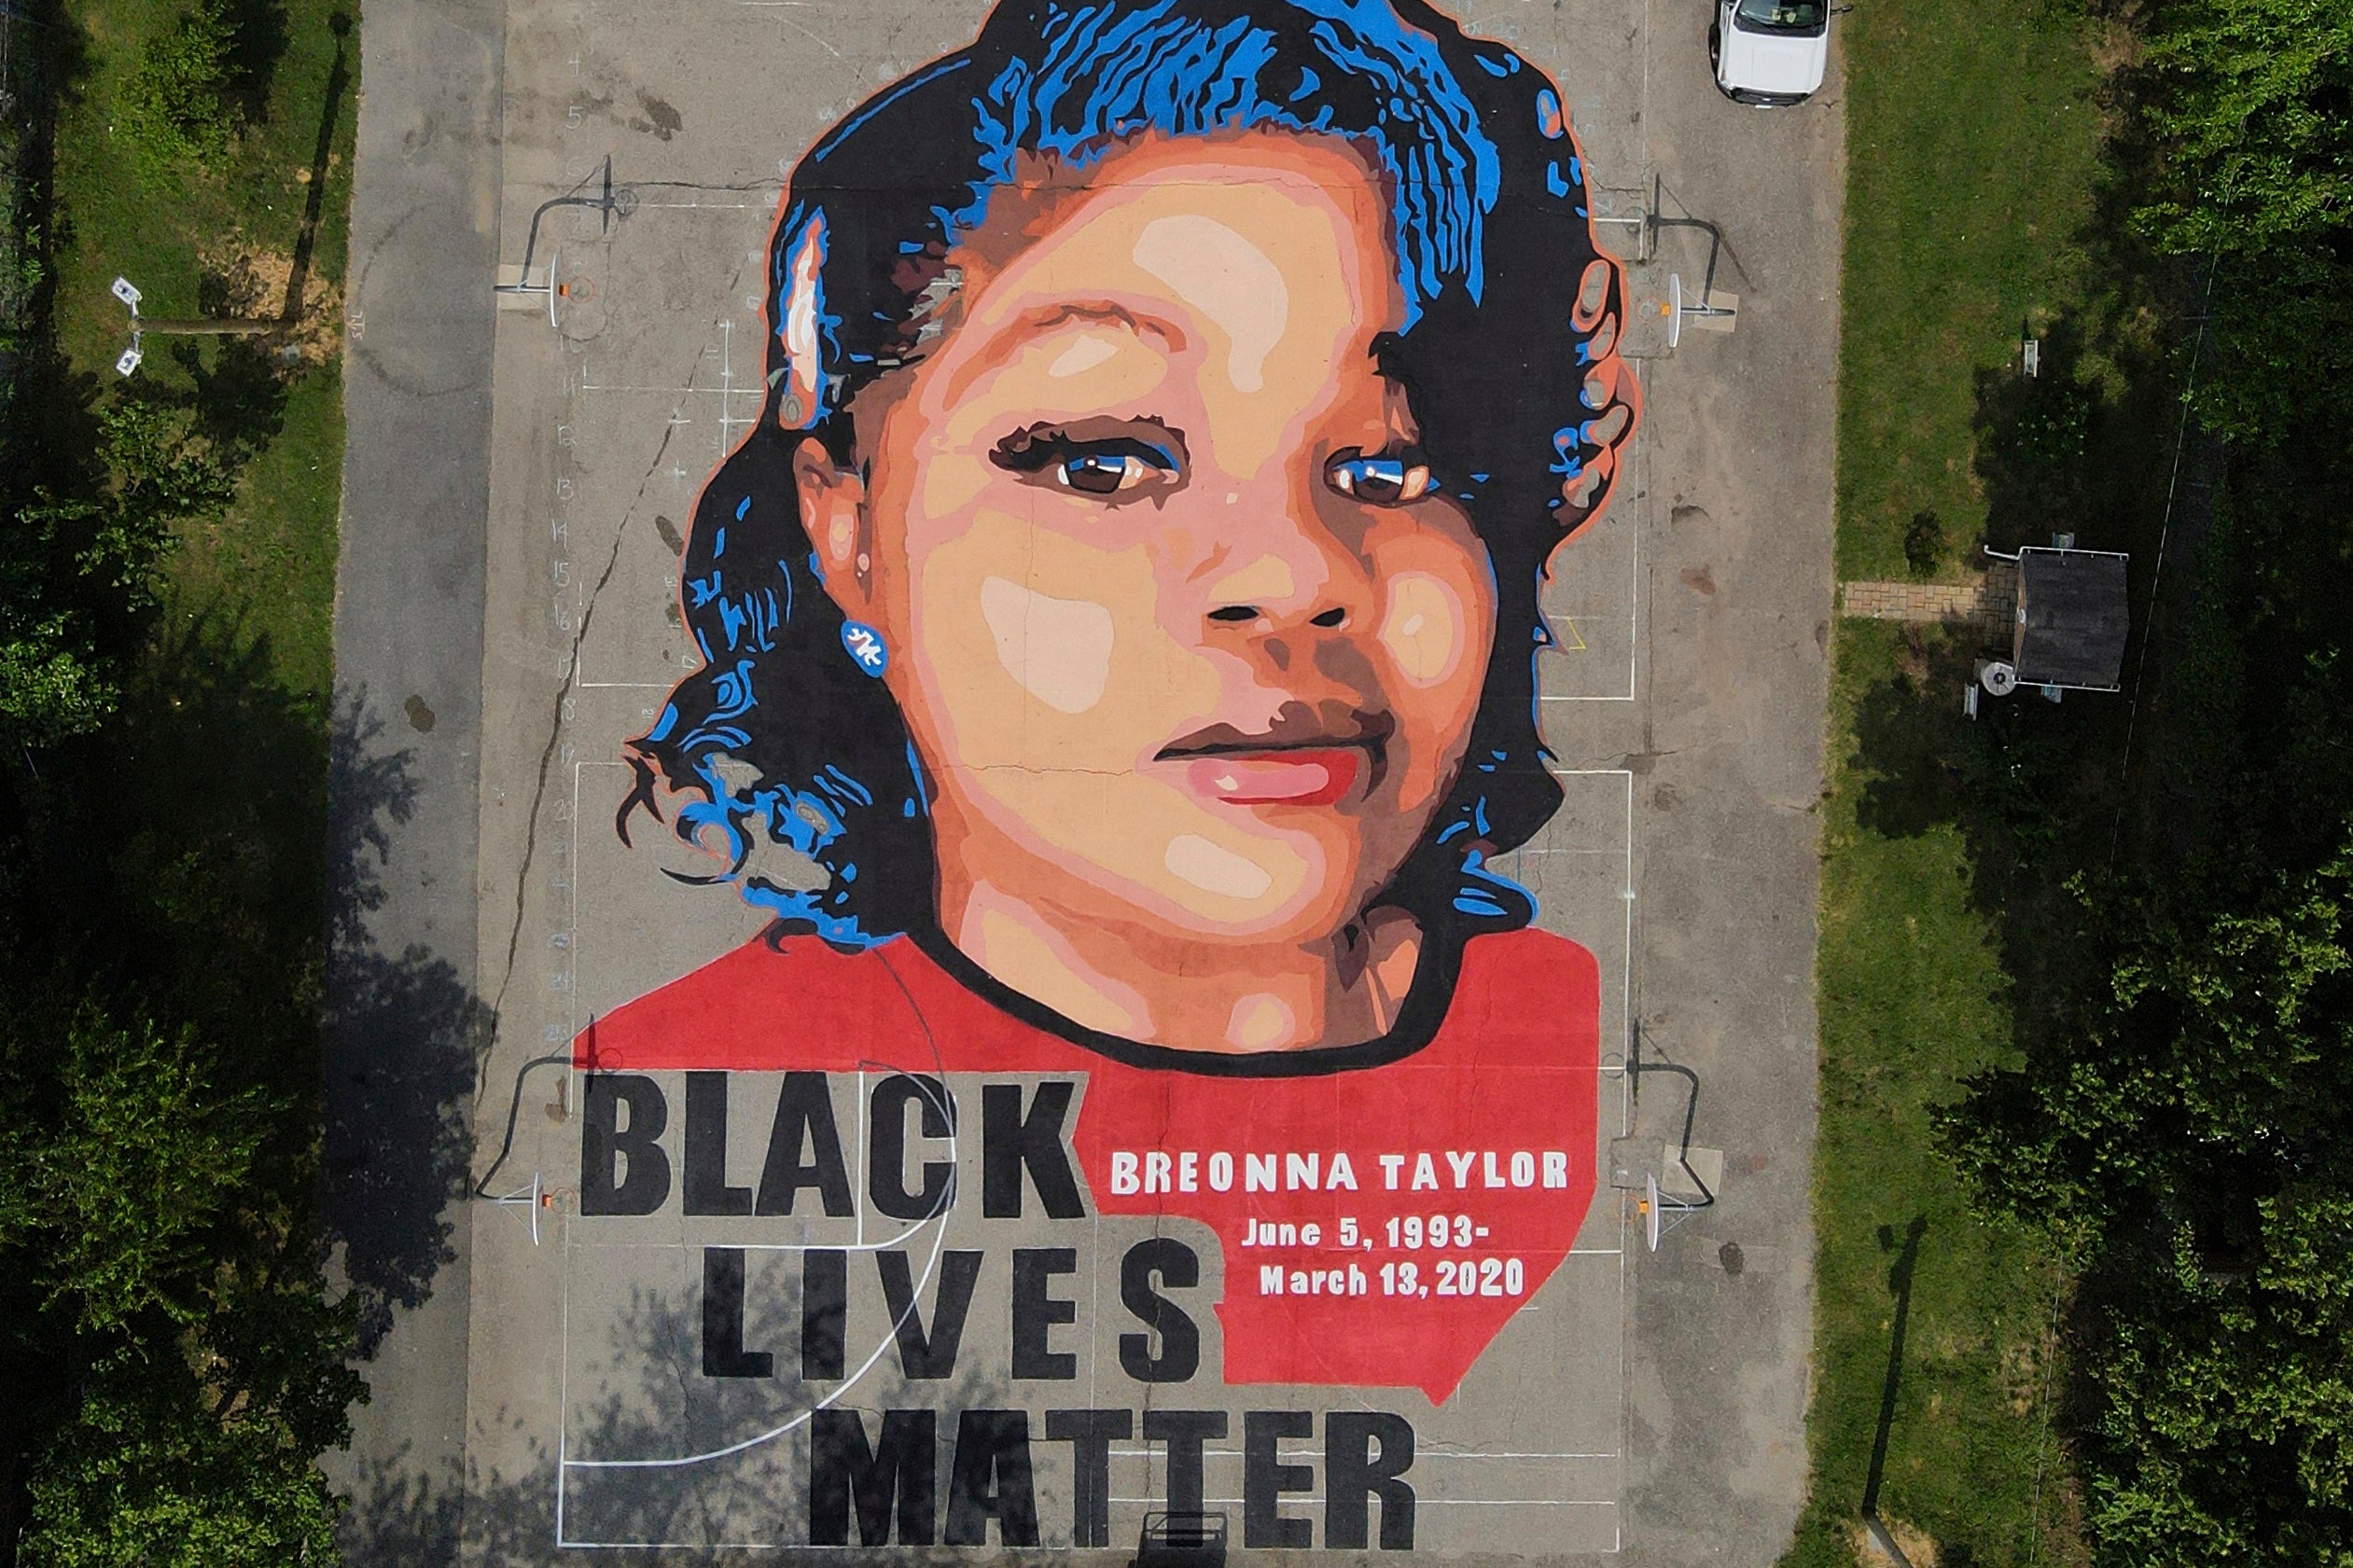 A mural in tribute to Breonna Taylor in Annapolis, Maryland